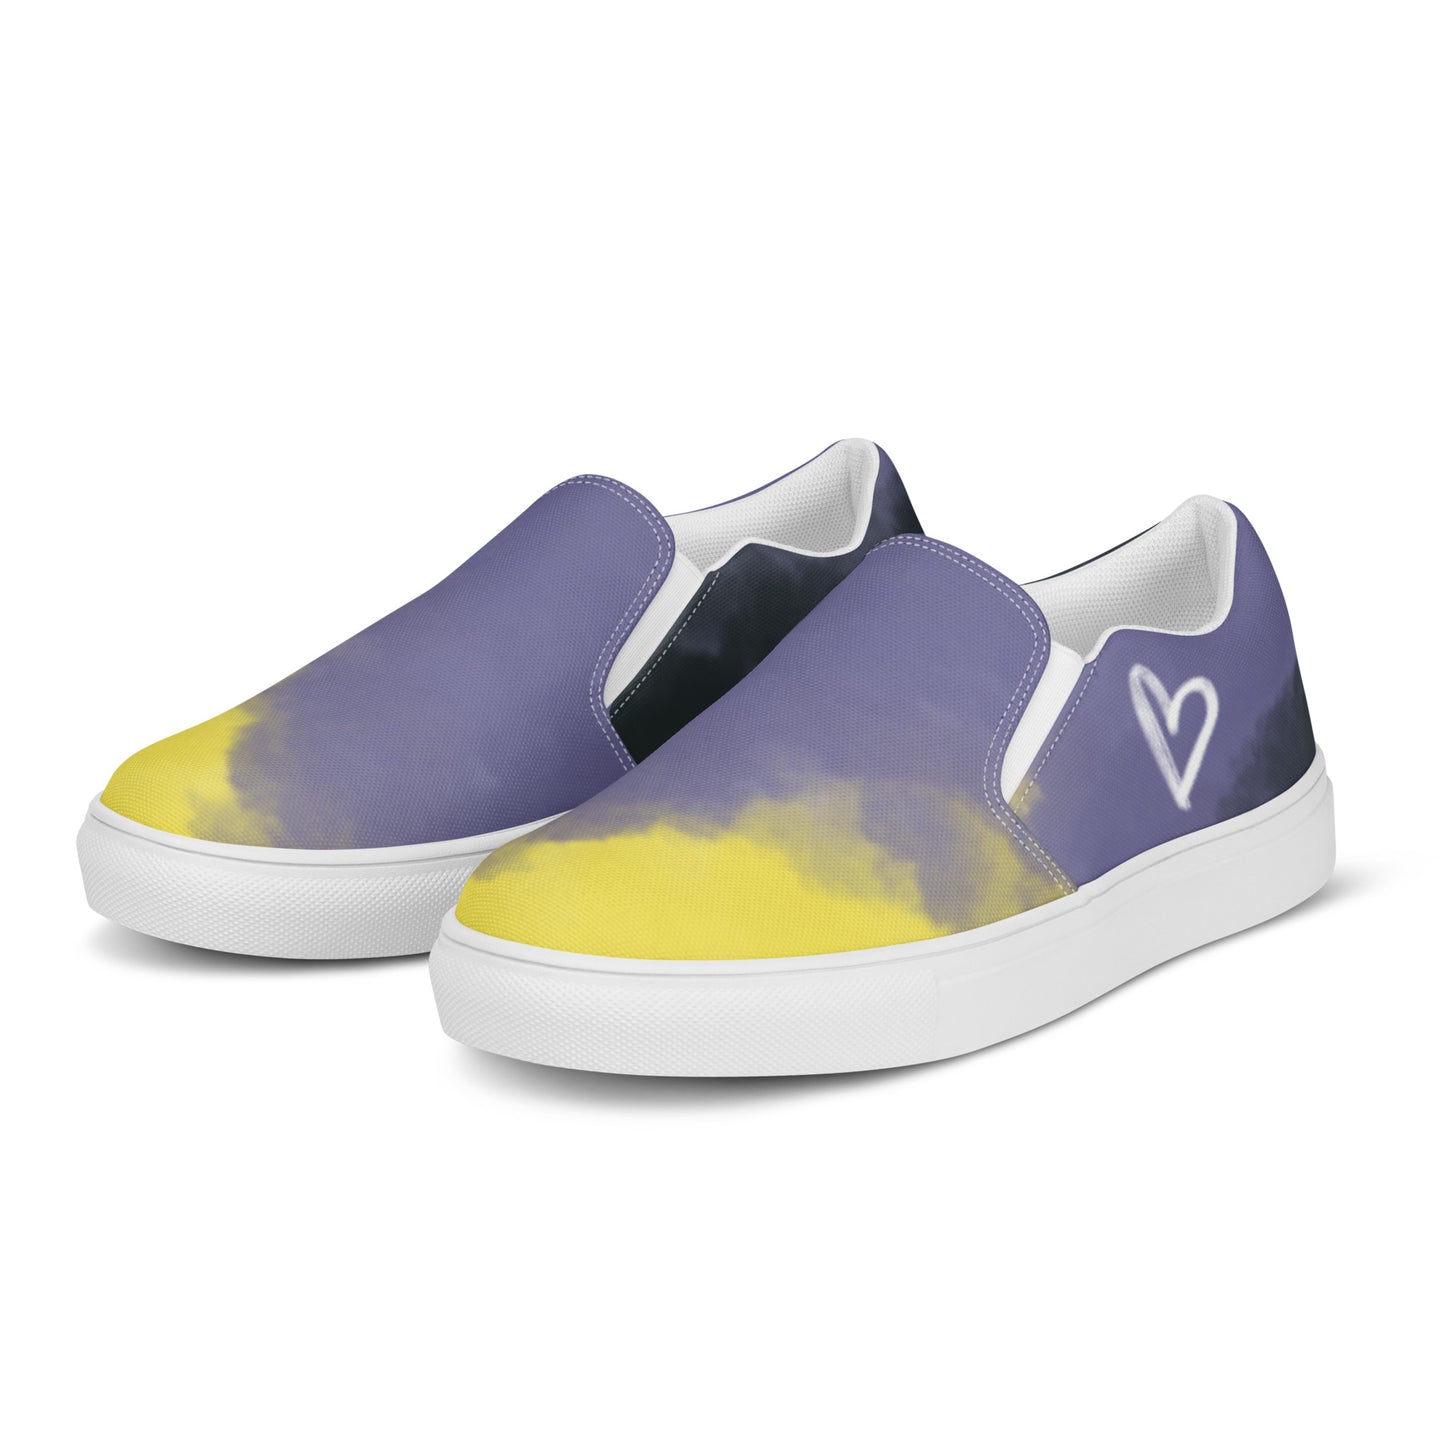 Left front view: A pair of slip-on shoes with the non-binary colors in wisps of clouds with a white hand drawn heart on the outside under the ankle and the Aras Sivad Studio logo in white on the back.